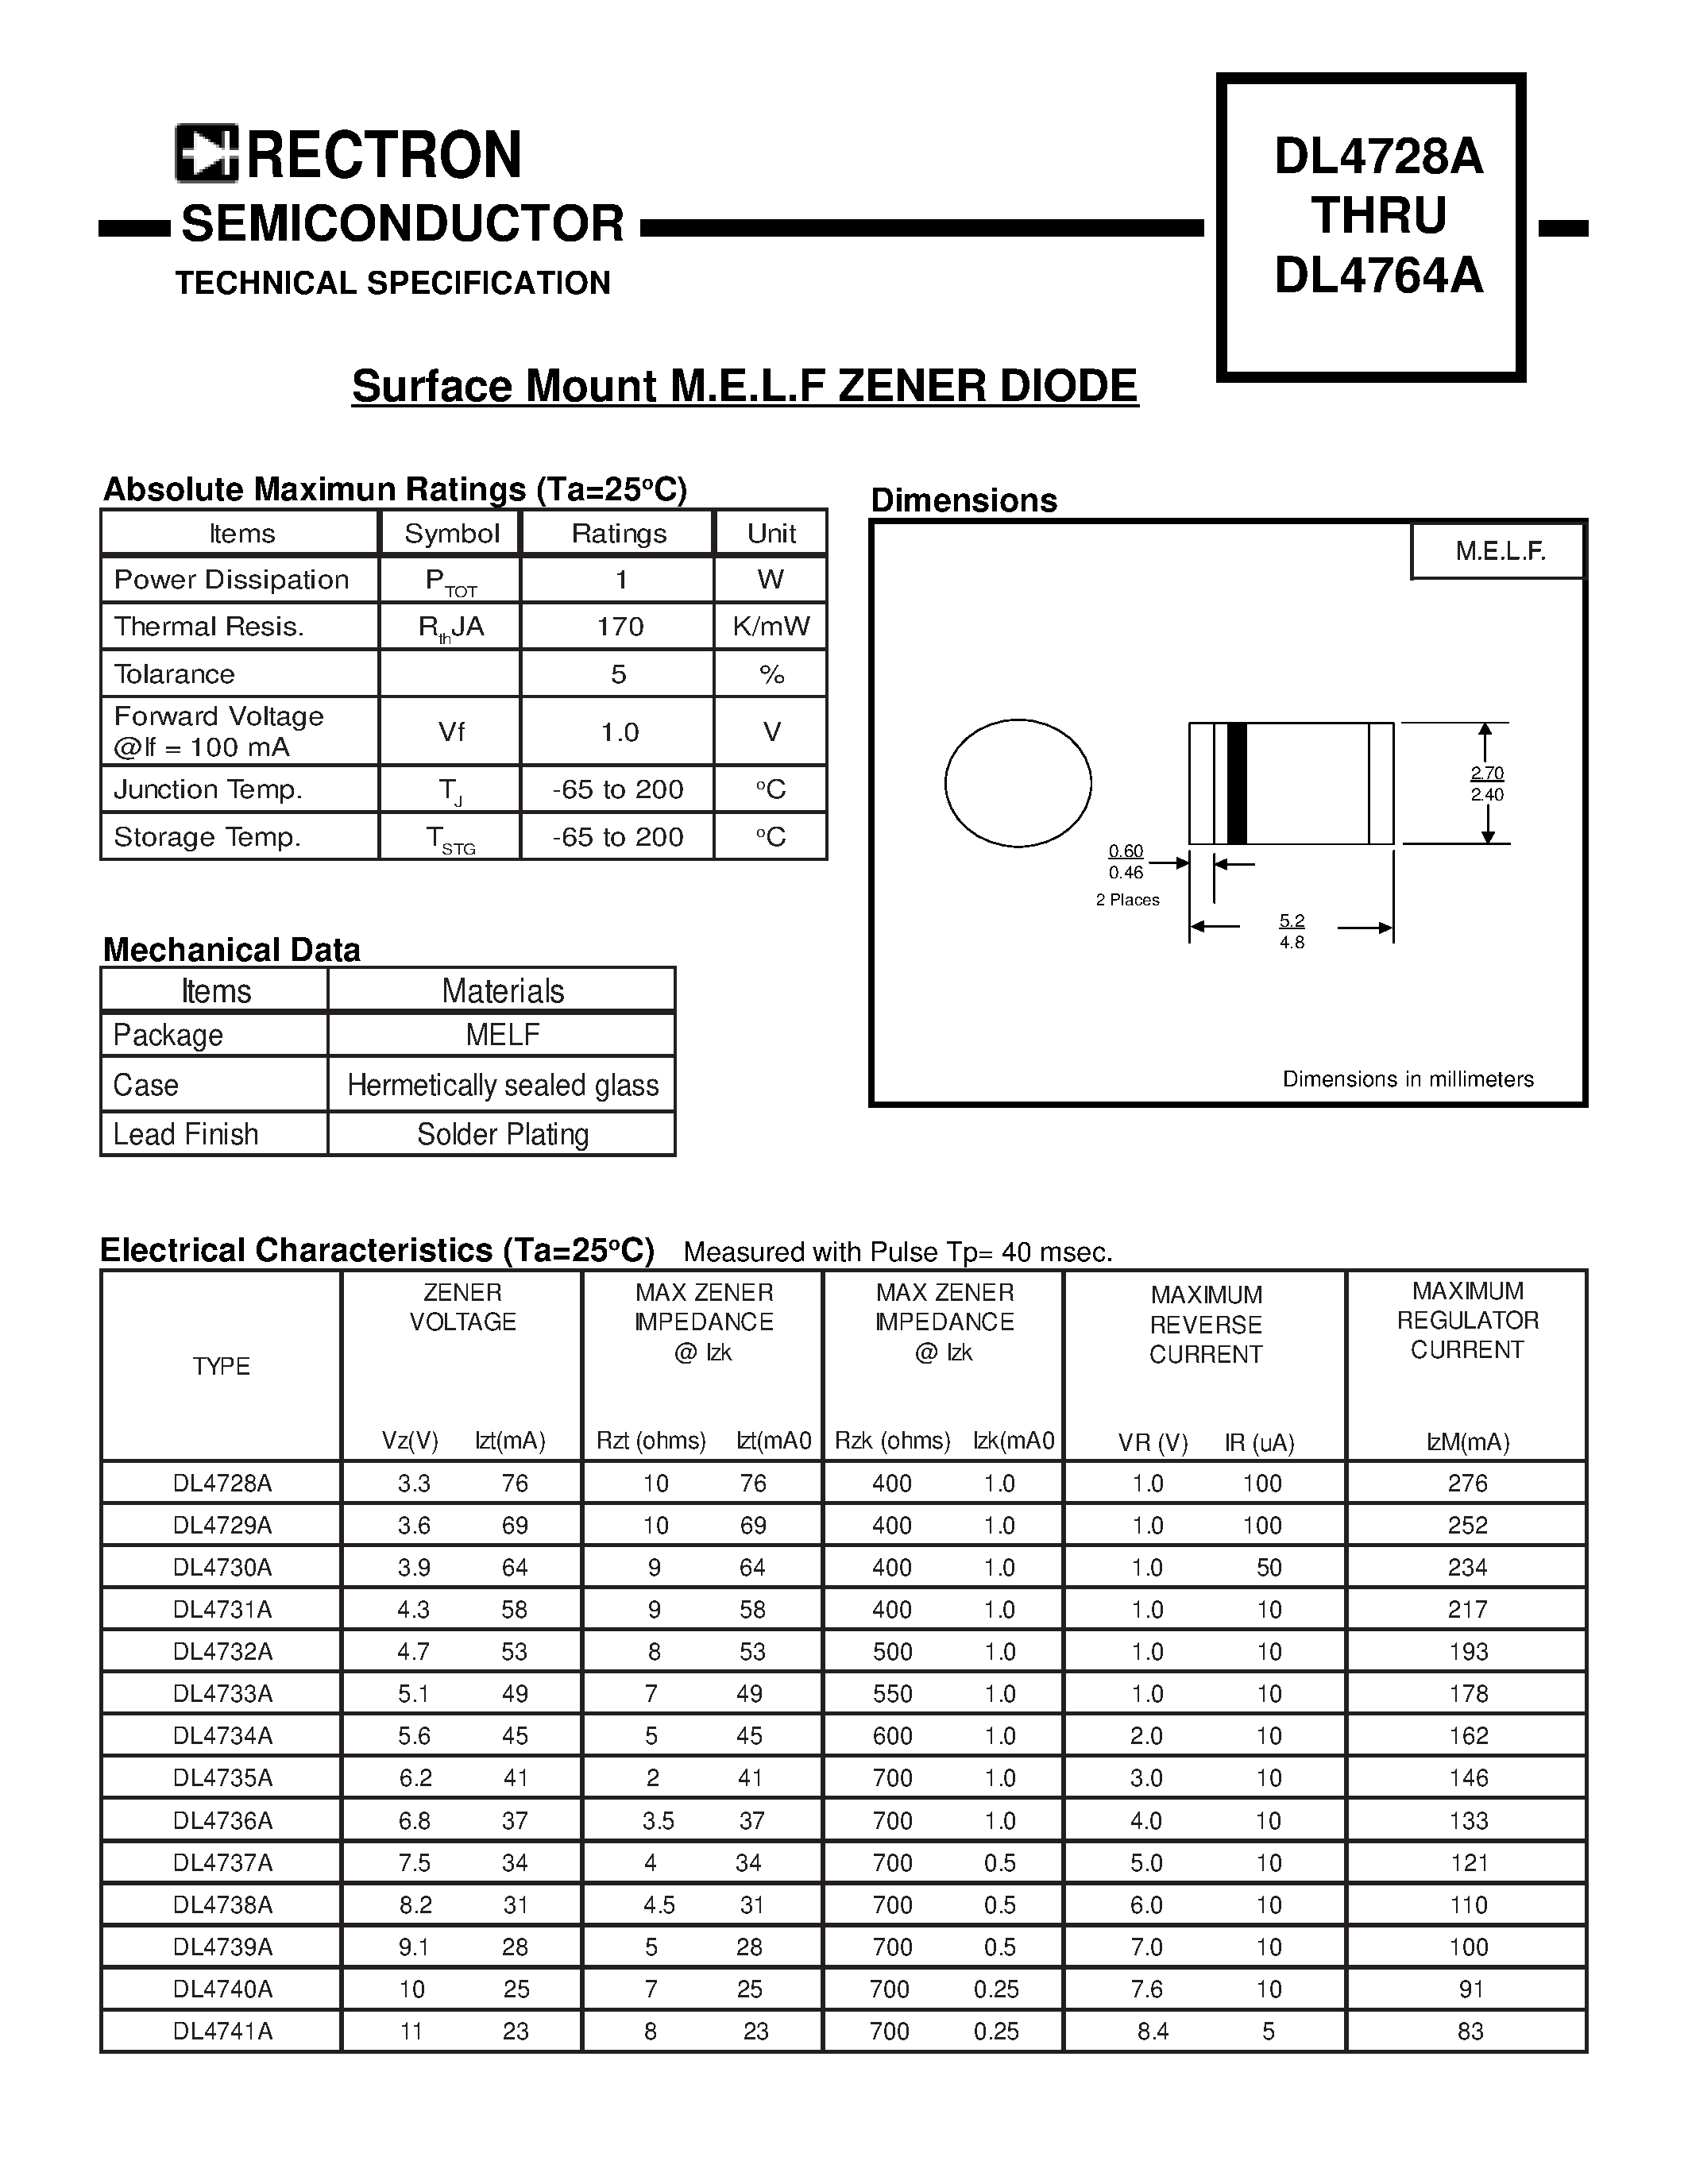 Datasheet DL4762A - Surface Mount M.E.L.F ZENER DIODE page 1